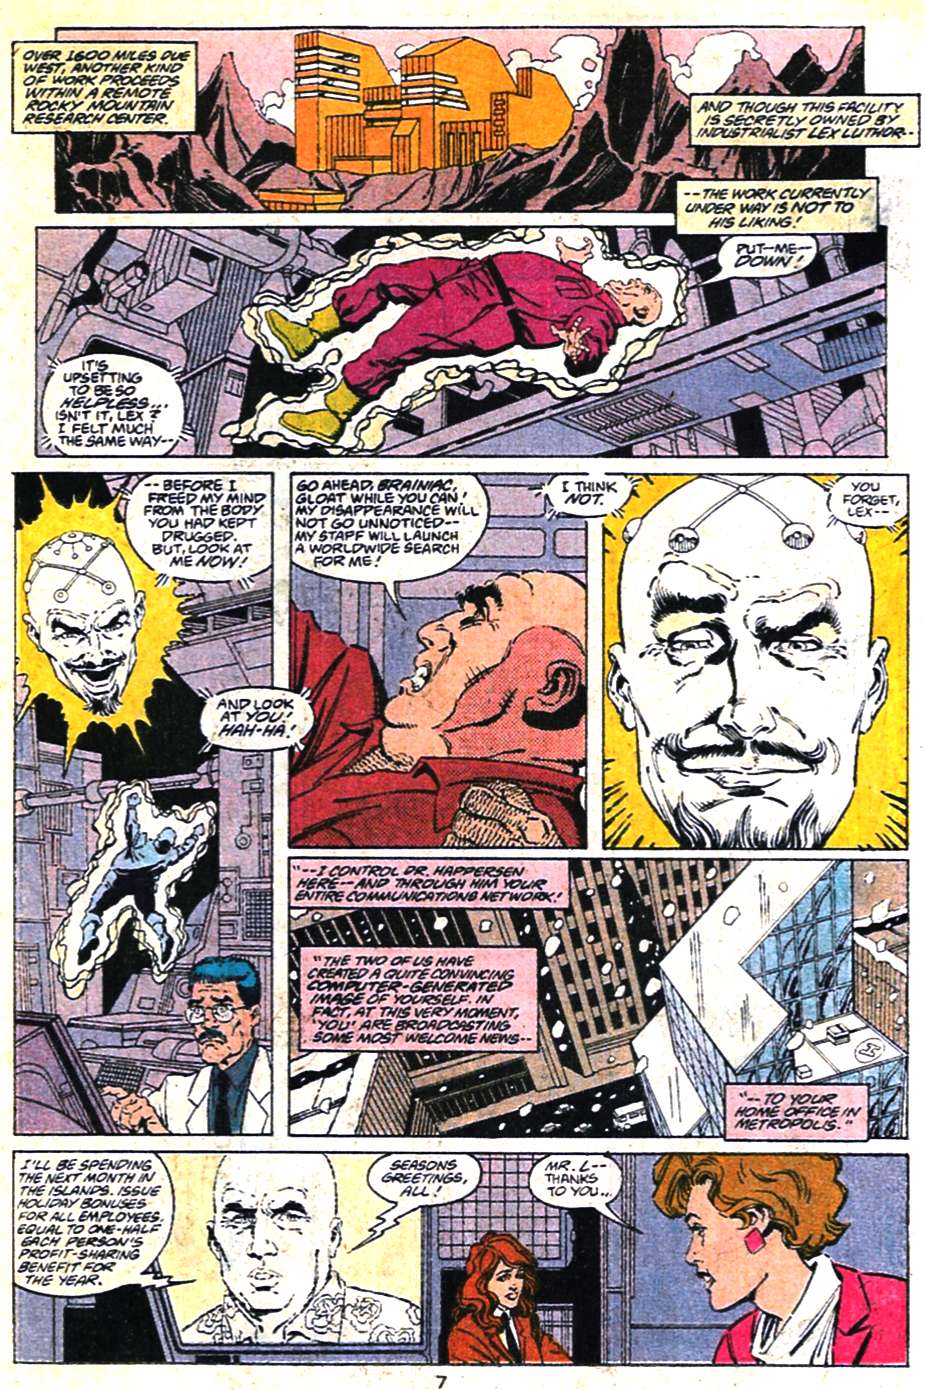 Adventures of Superman (1987) 462 Page 7